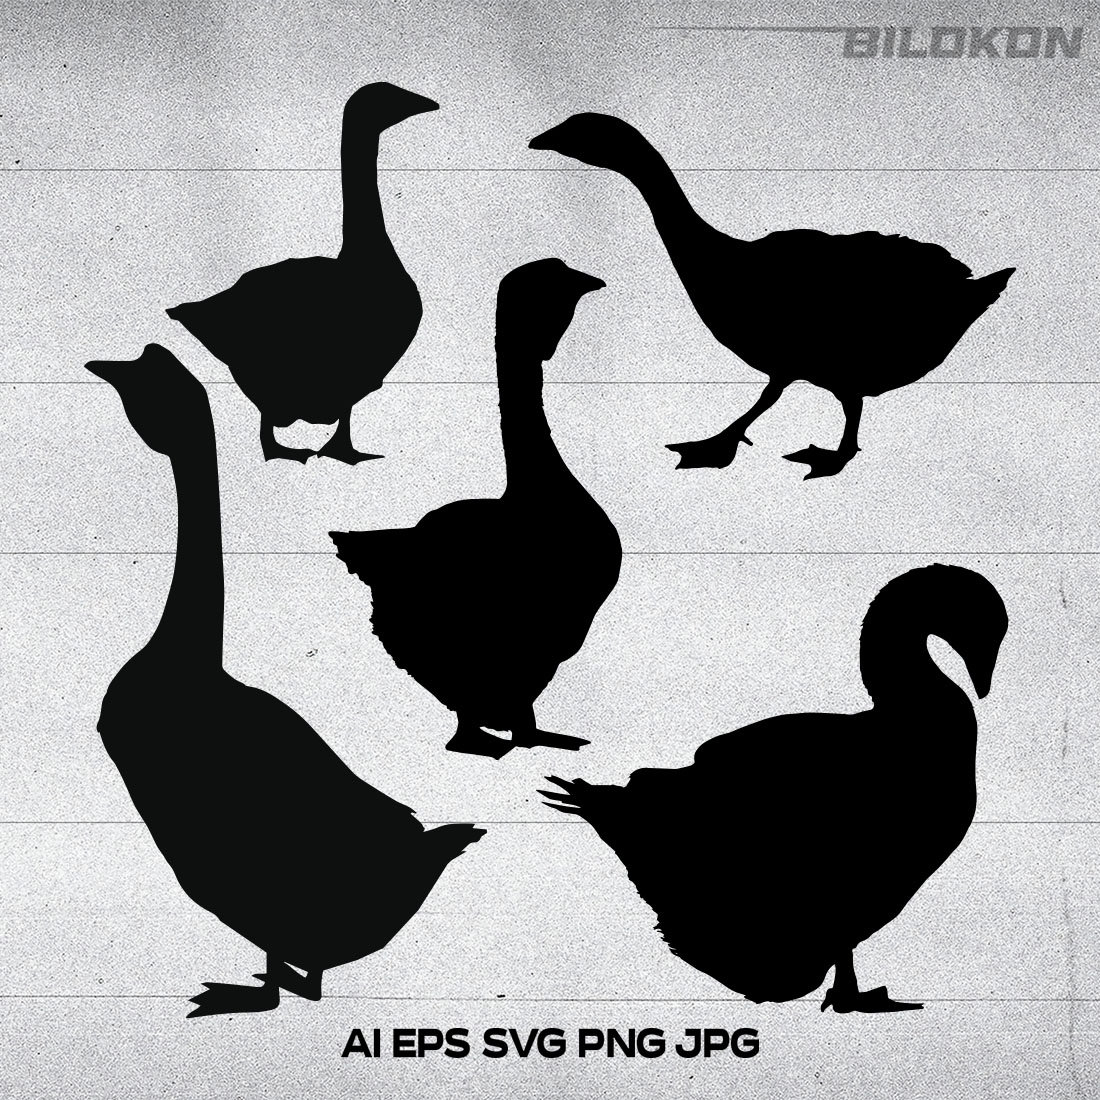 Group of ducks and geese silhouettes on a sheet of paper.